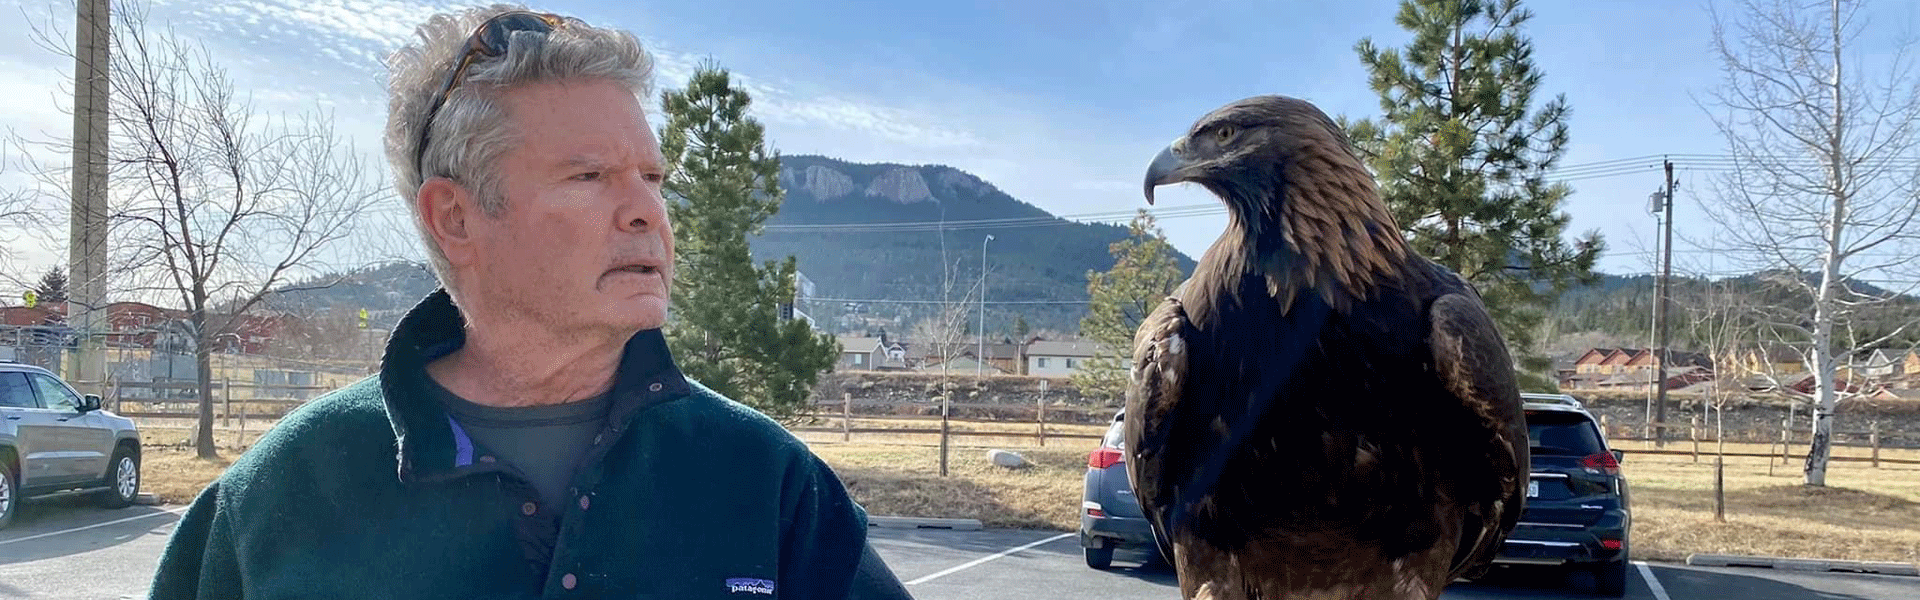 man standing next to golden eagle